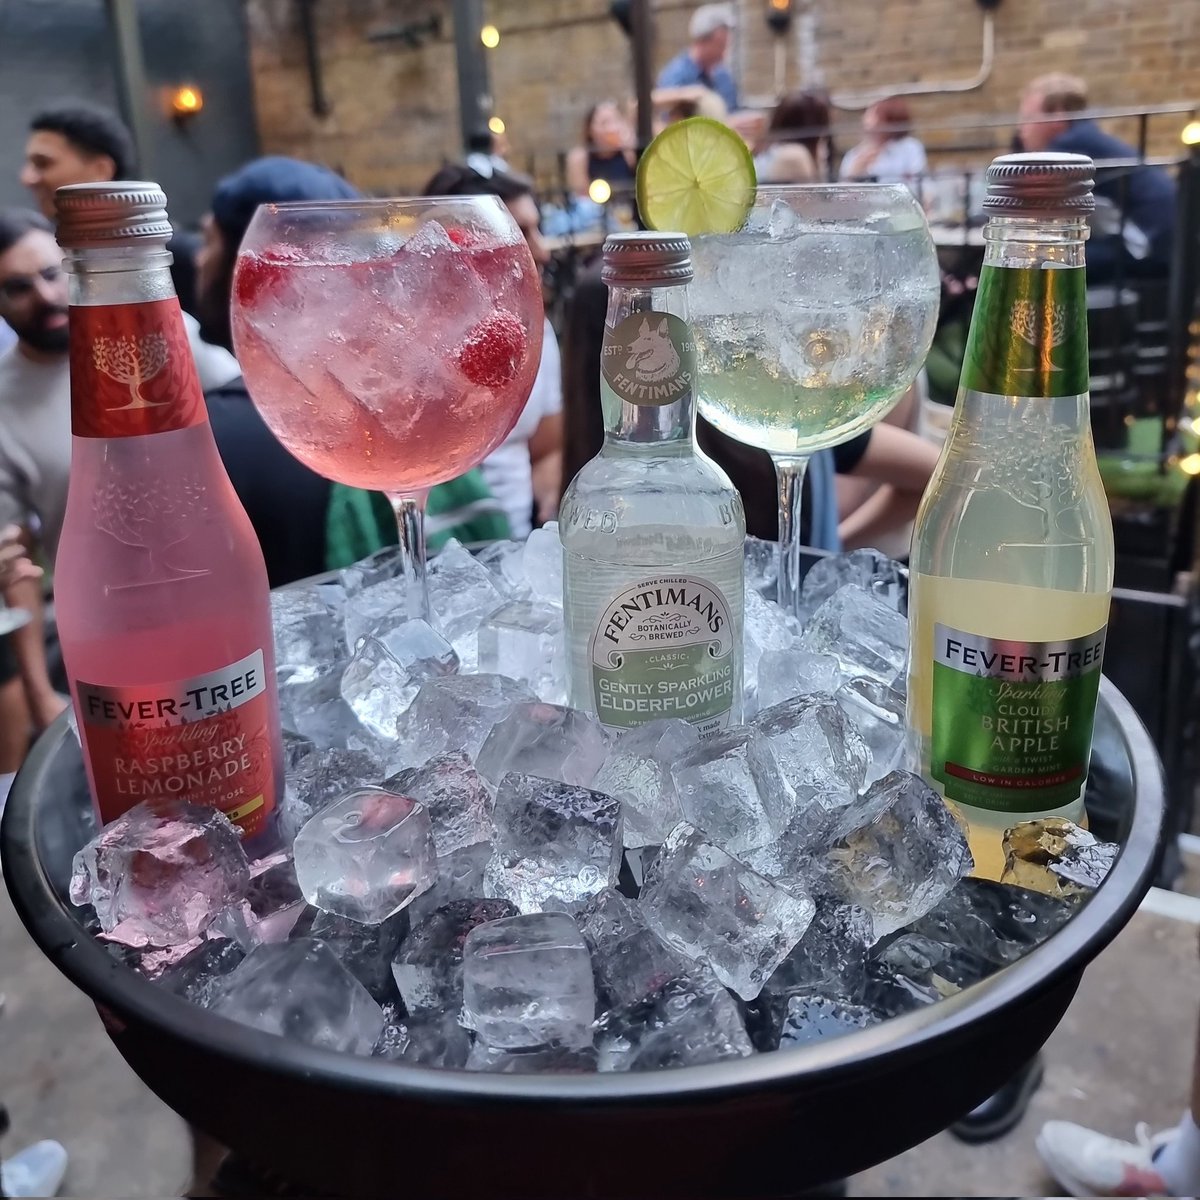 Try our new range of refreshing drinks!
Introducing some of the new favs, Fever tree Raspberry pink Lemonade, Fentimans Elderflower sparkling and a British classic Cloudy Apple 😉

#drink #nonalcoholic #softdrinks #fevertree #Fentimans #pinklemonade #pubterrace #pubwithgarden